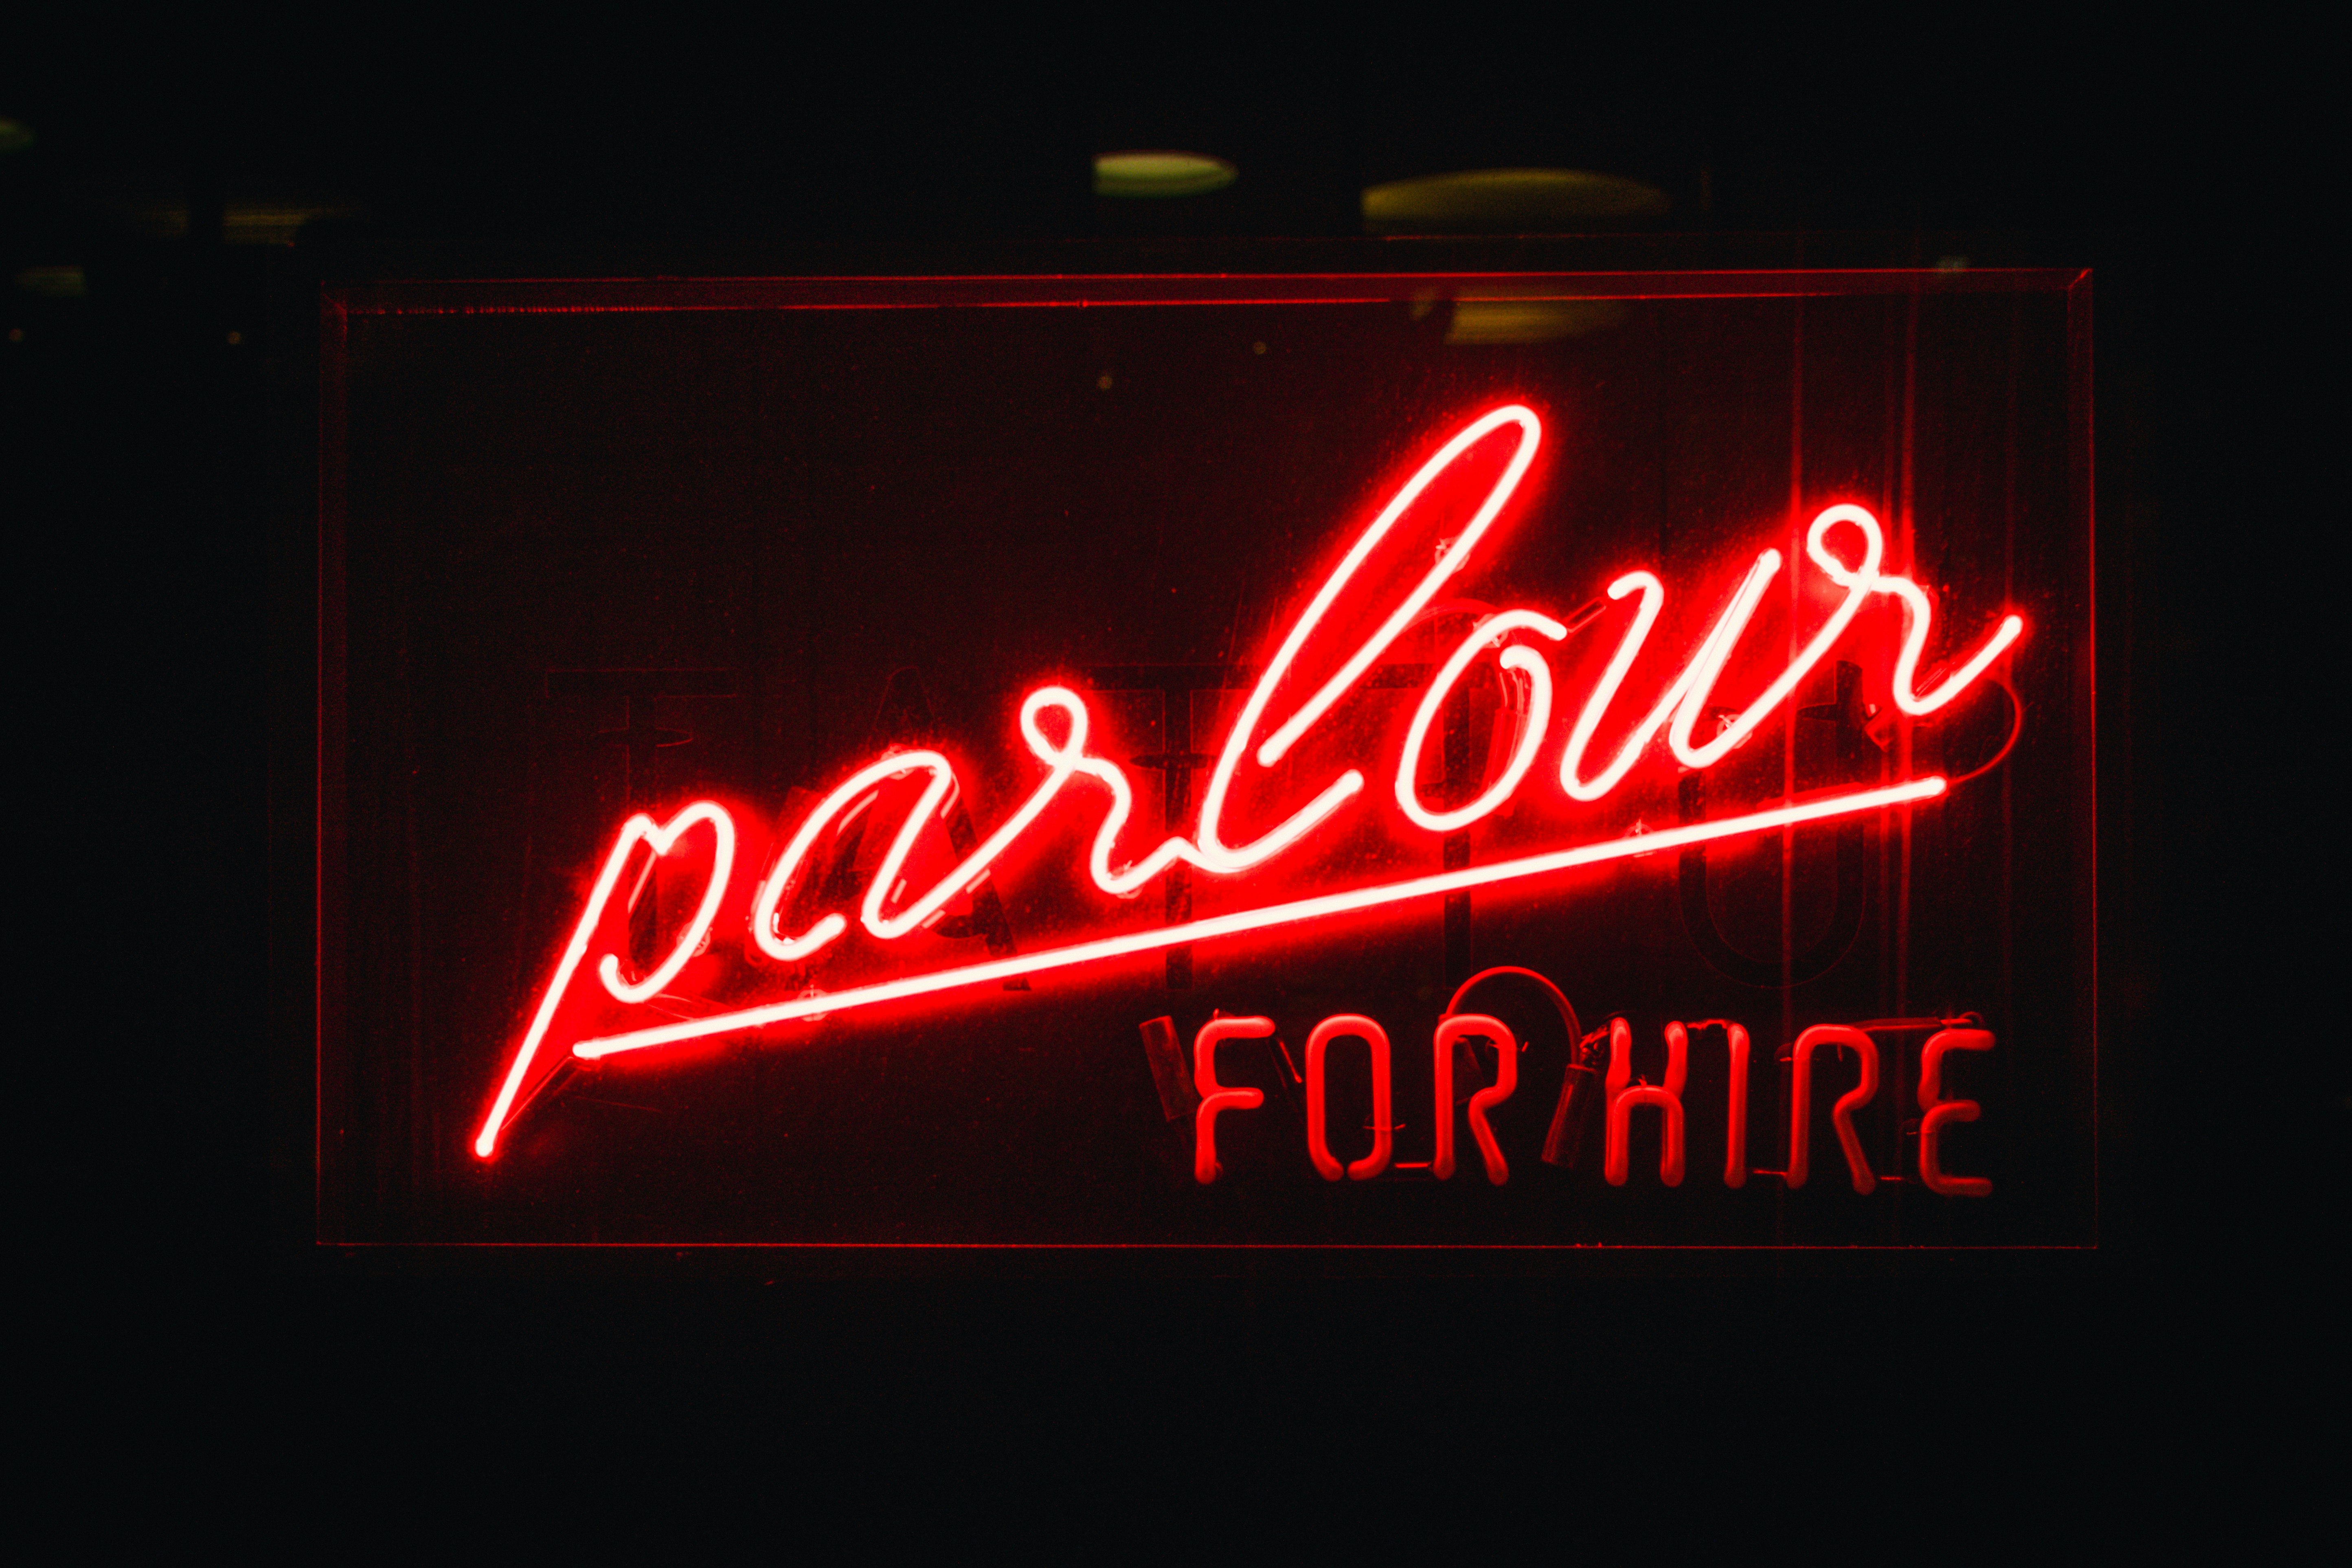 Parlour for hire lighted neon light signage